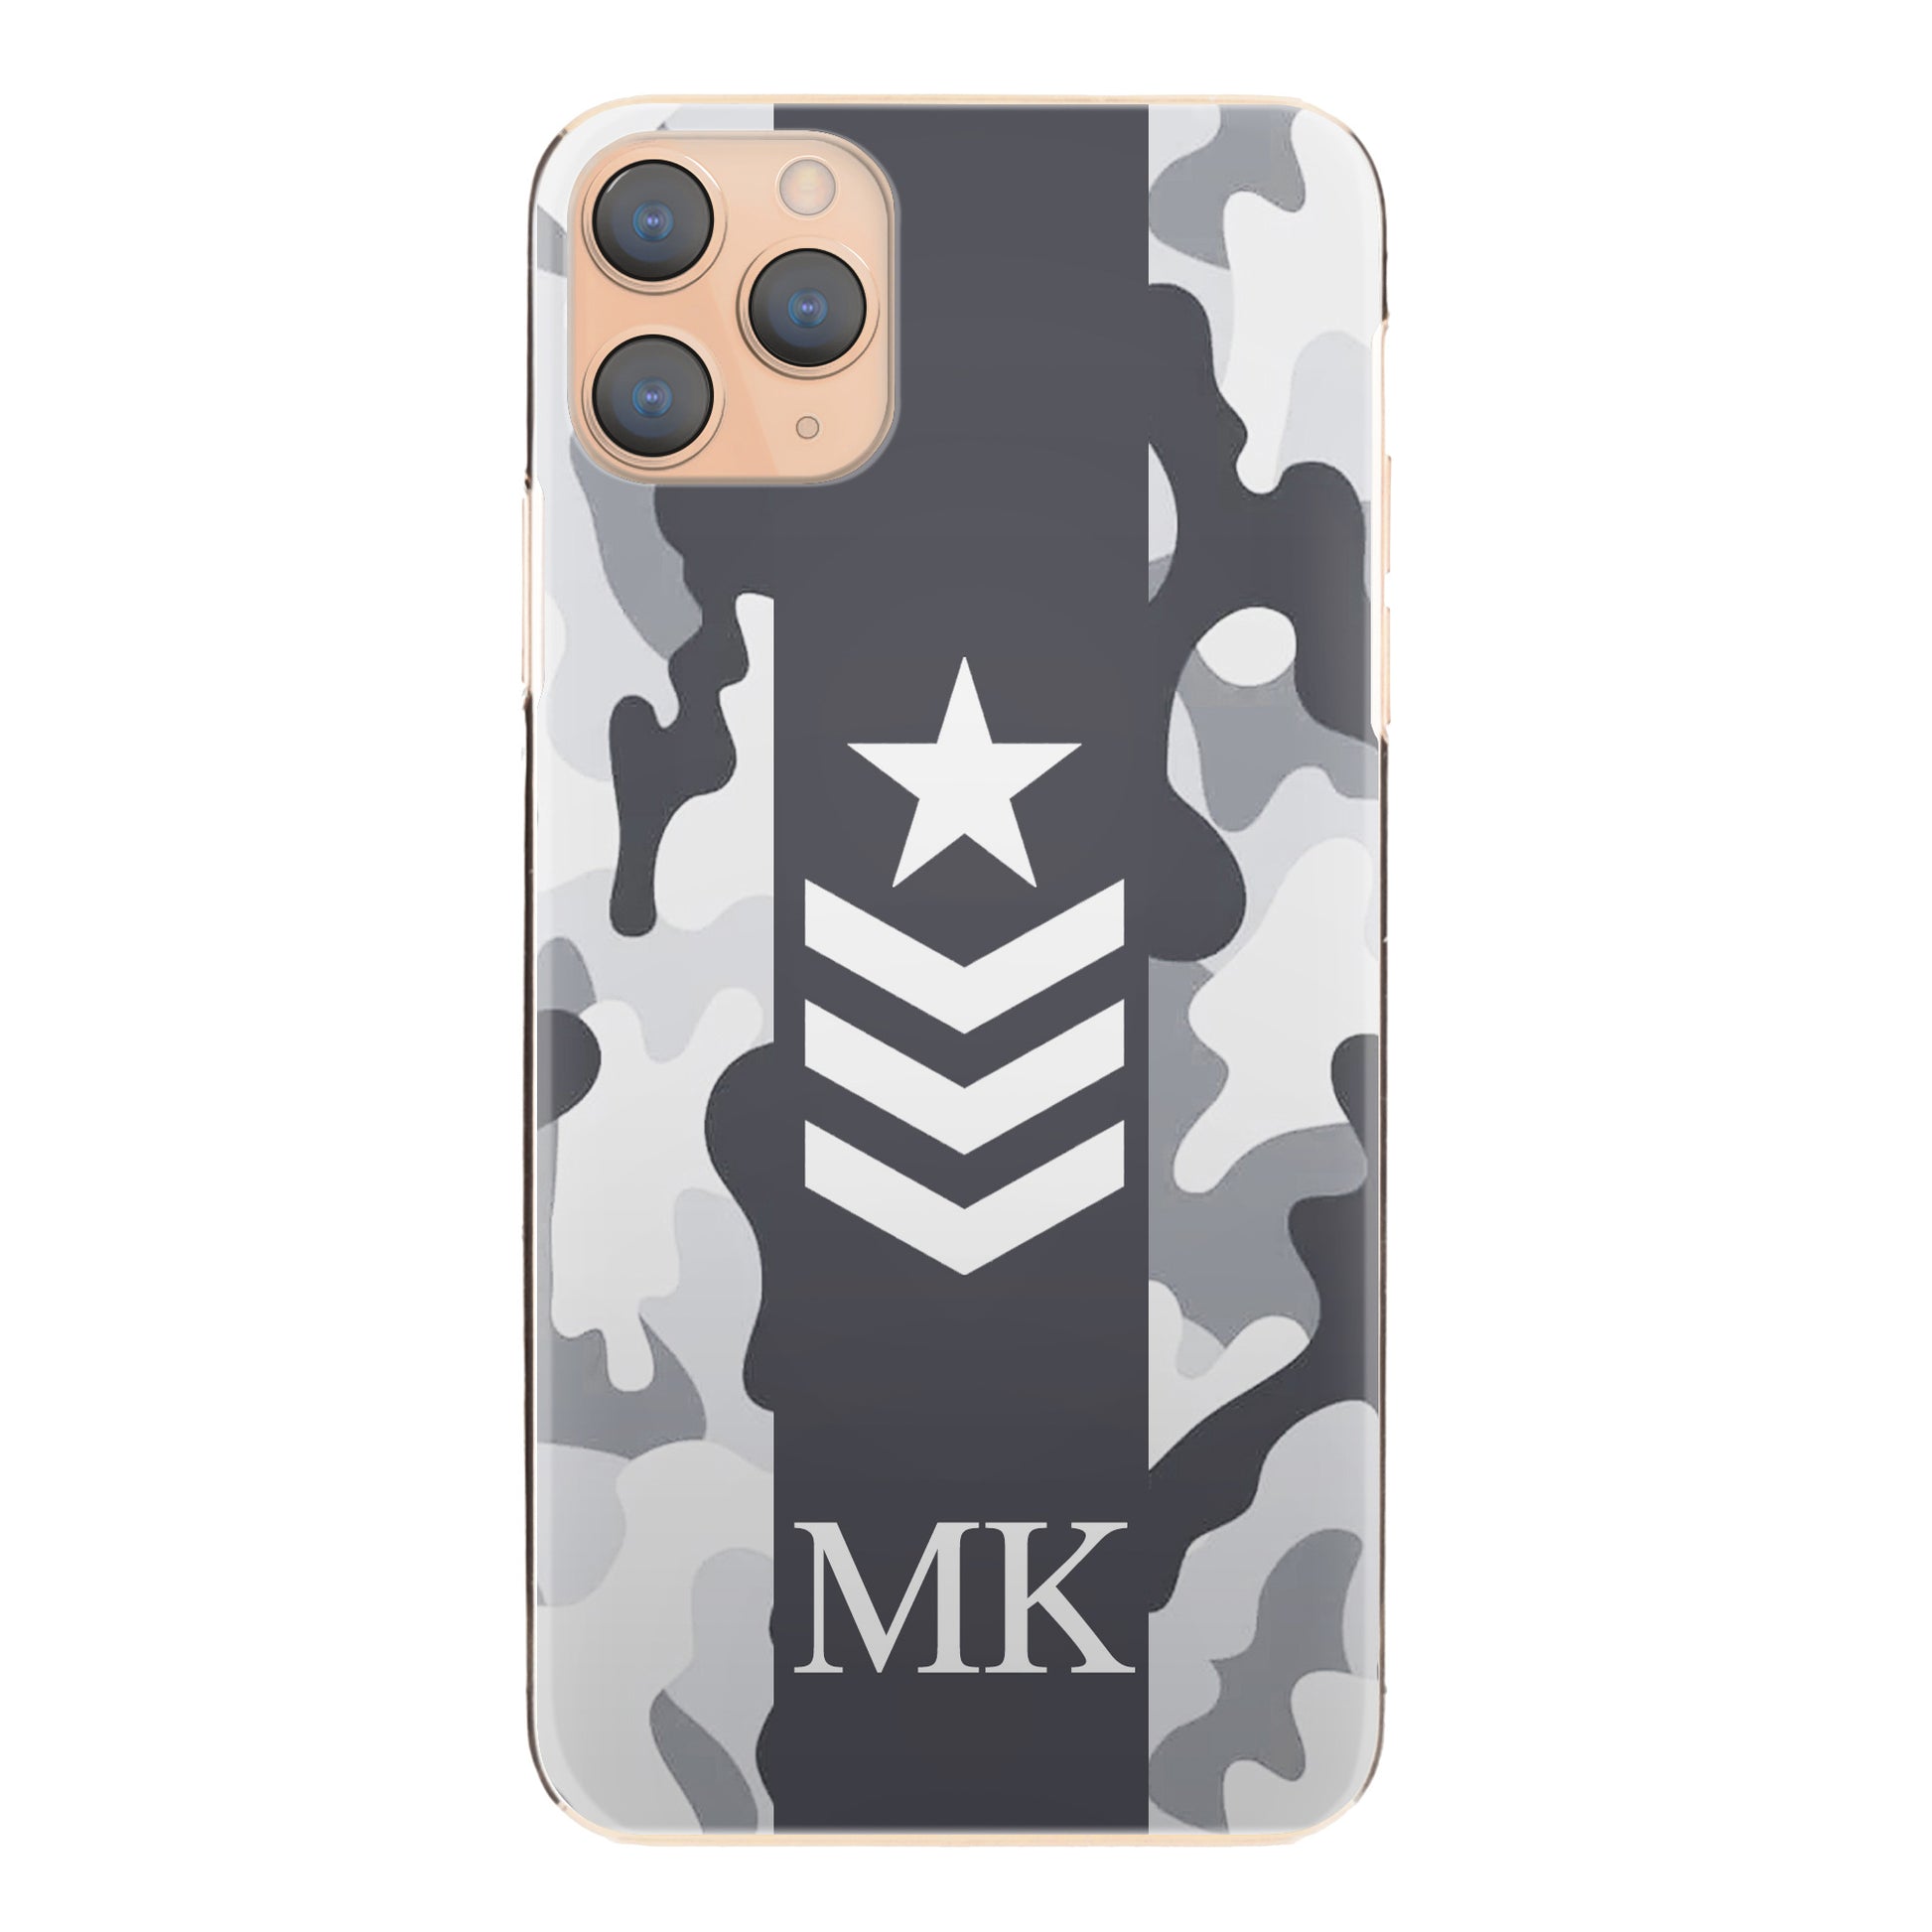 Personalised Oppo Phone Hard Case with Initials and Army Rank on Artic Camo